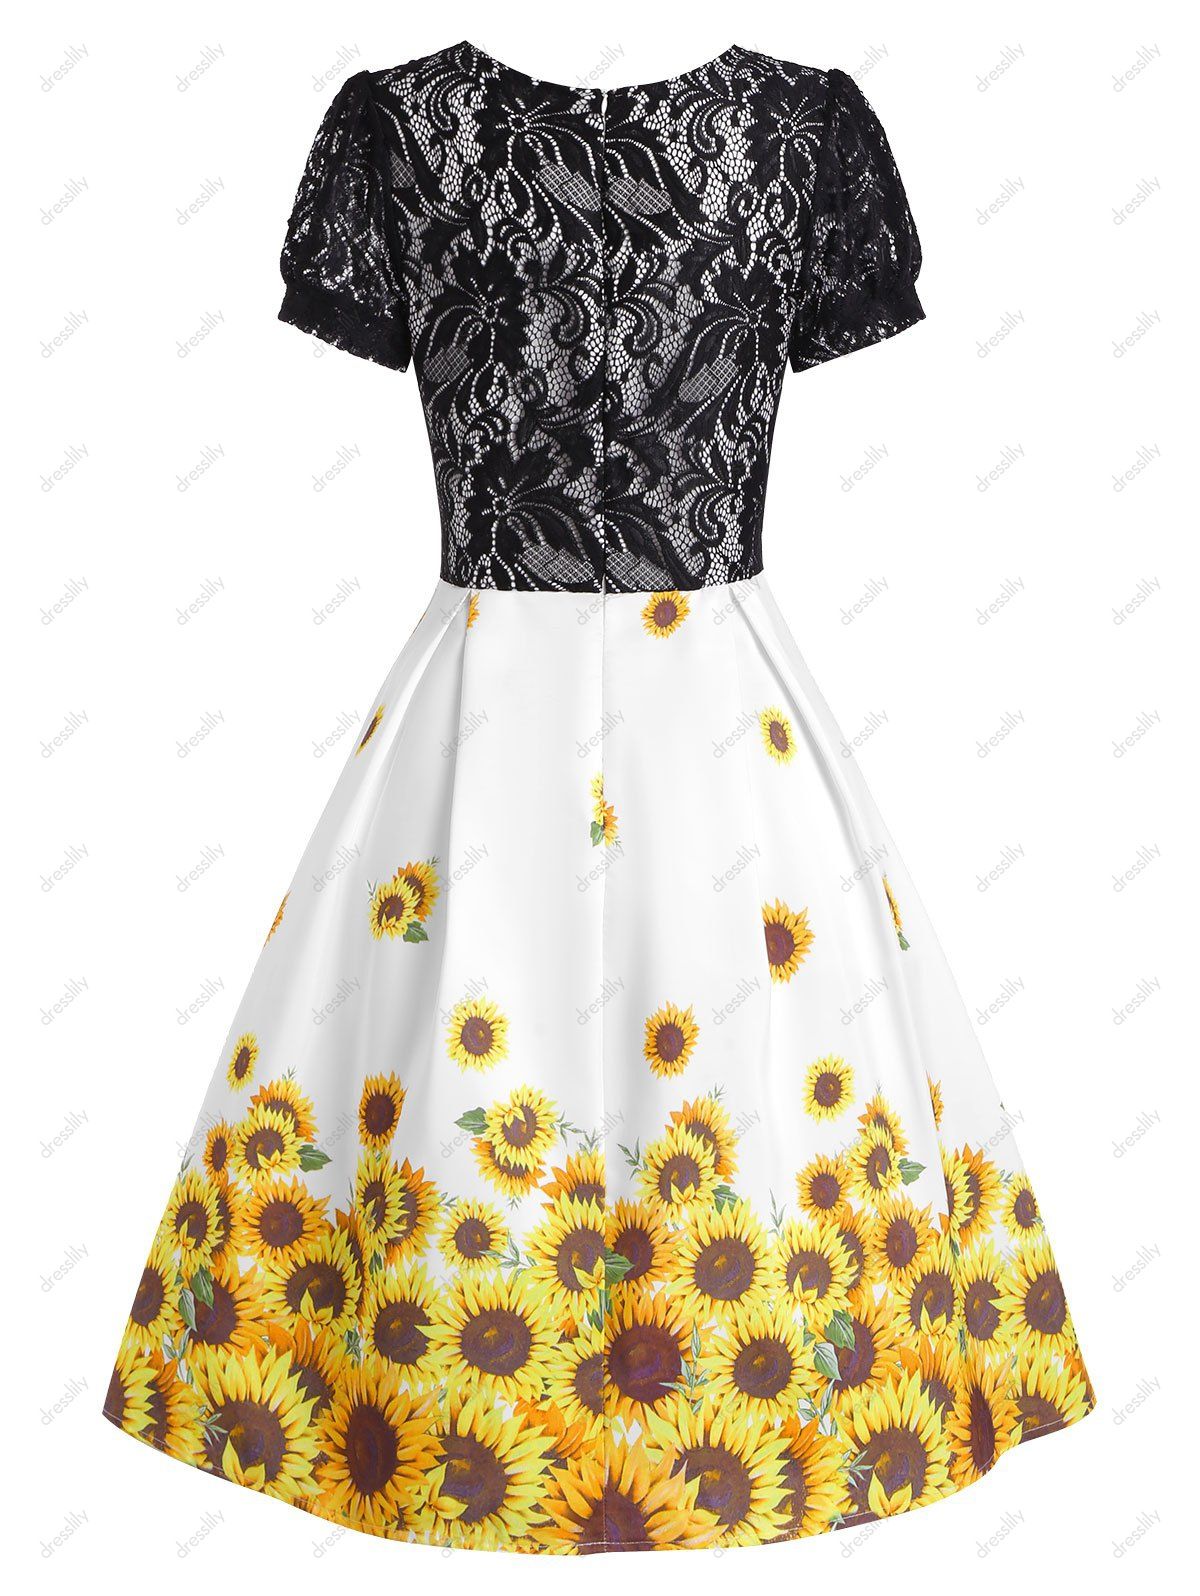 Sunflower Print Fit And Flare Dress Flower Lace Insert Lace-Up Short Sleeve Dress 